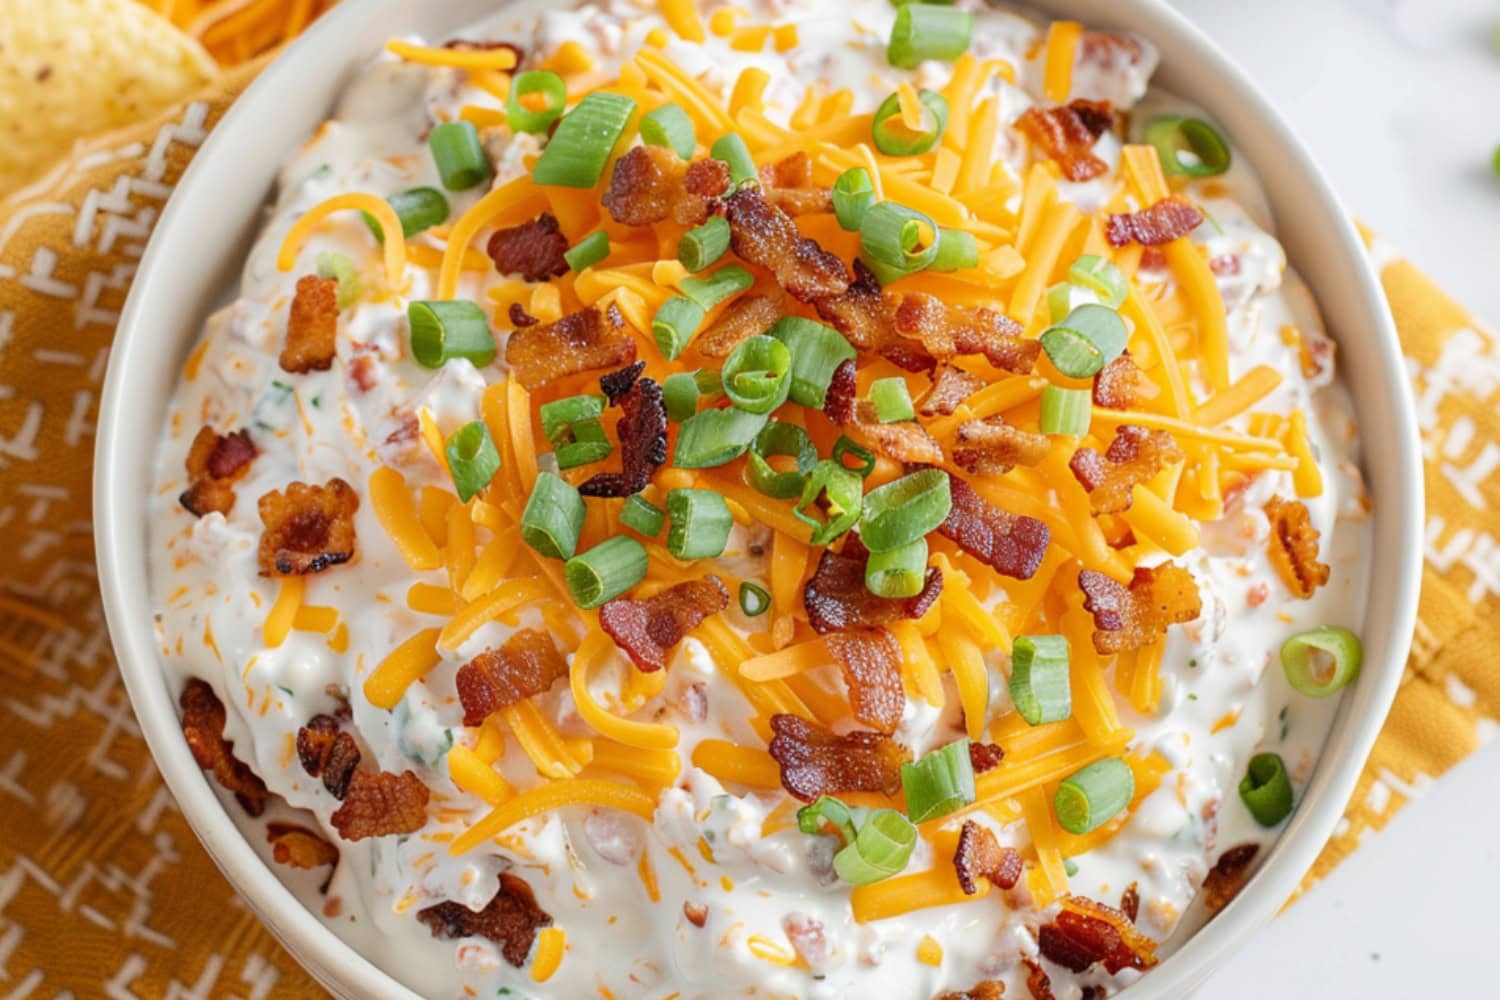 A bowl of crack dip garnished with shredded cheddar cheese, bacon bits and green onions.